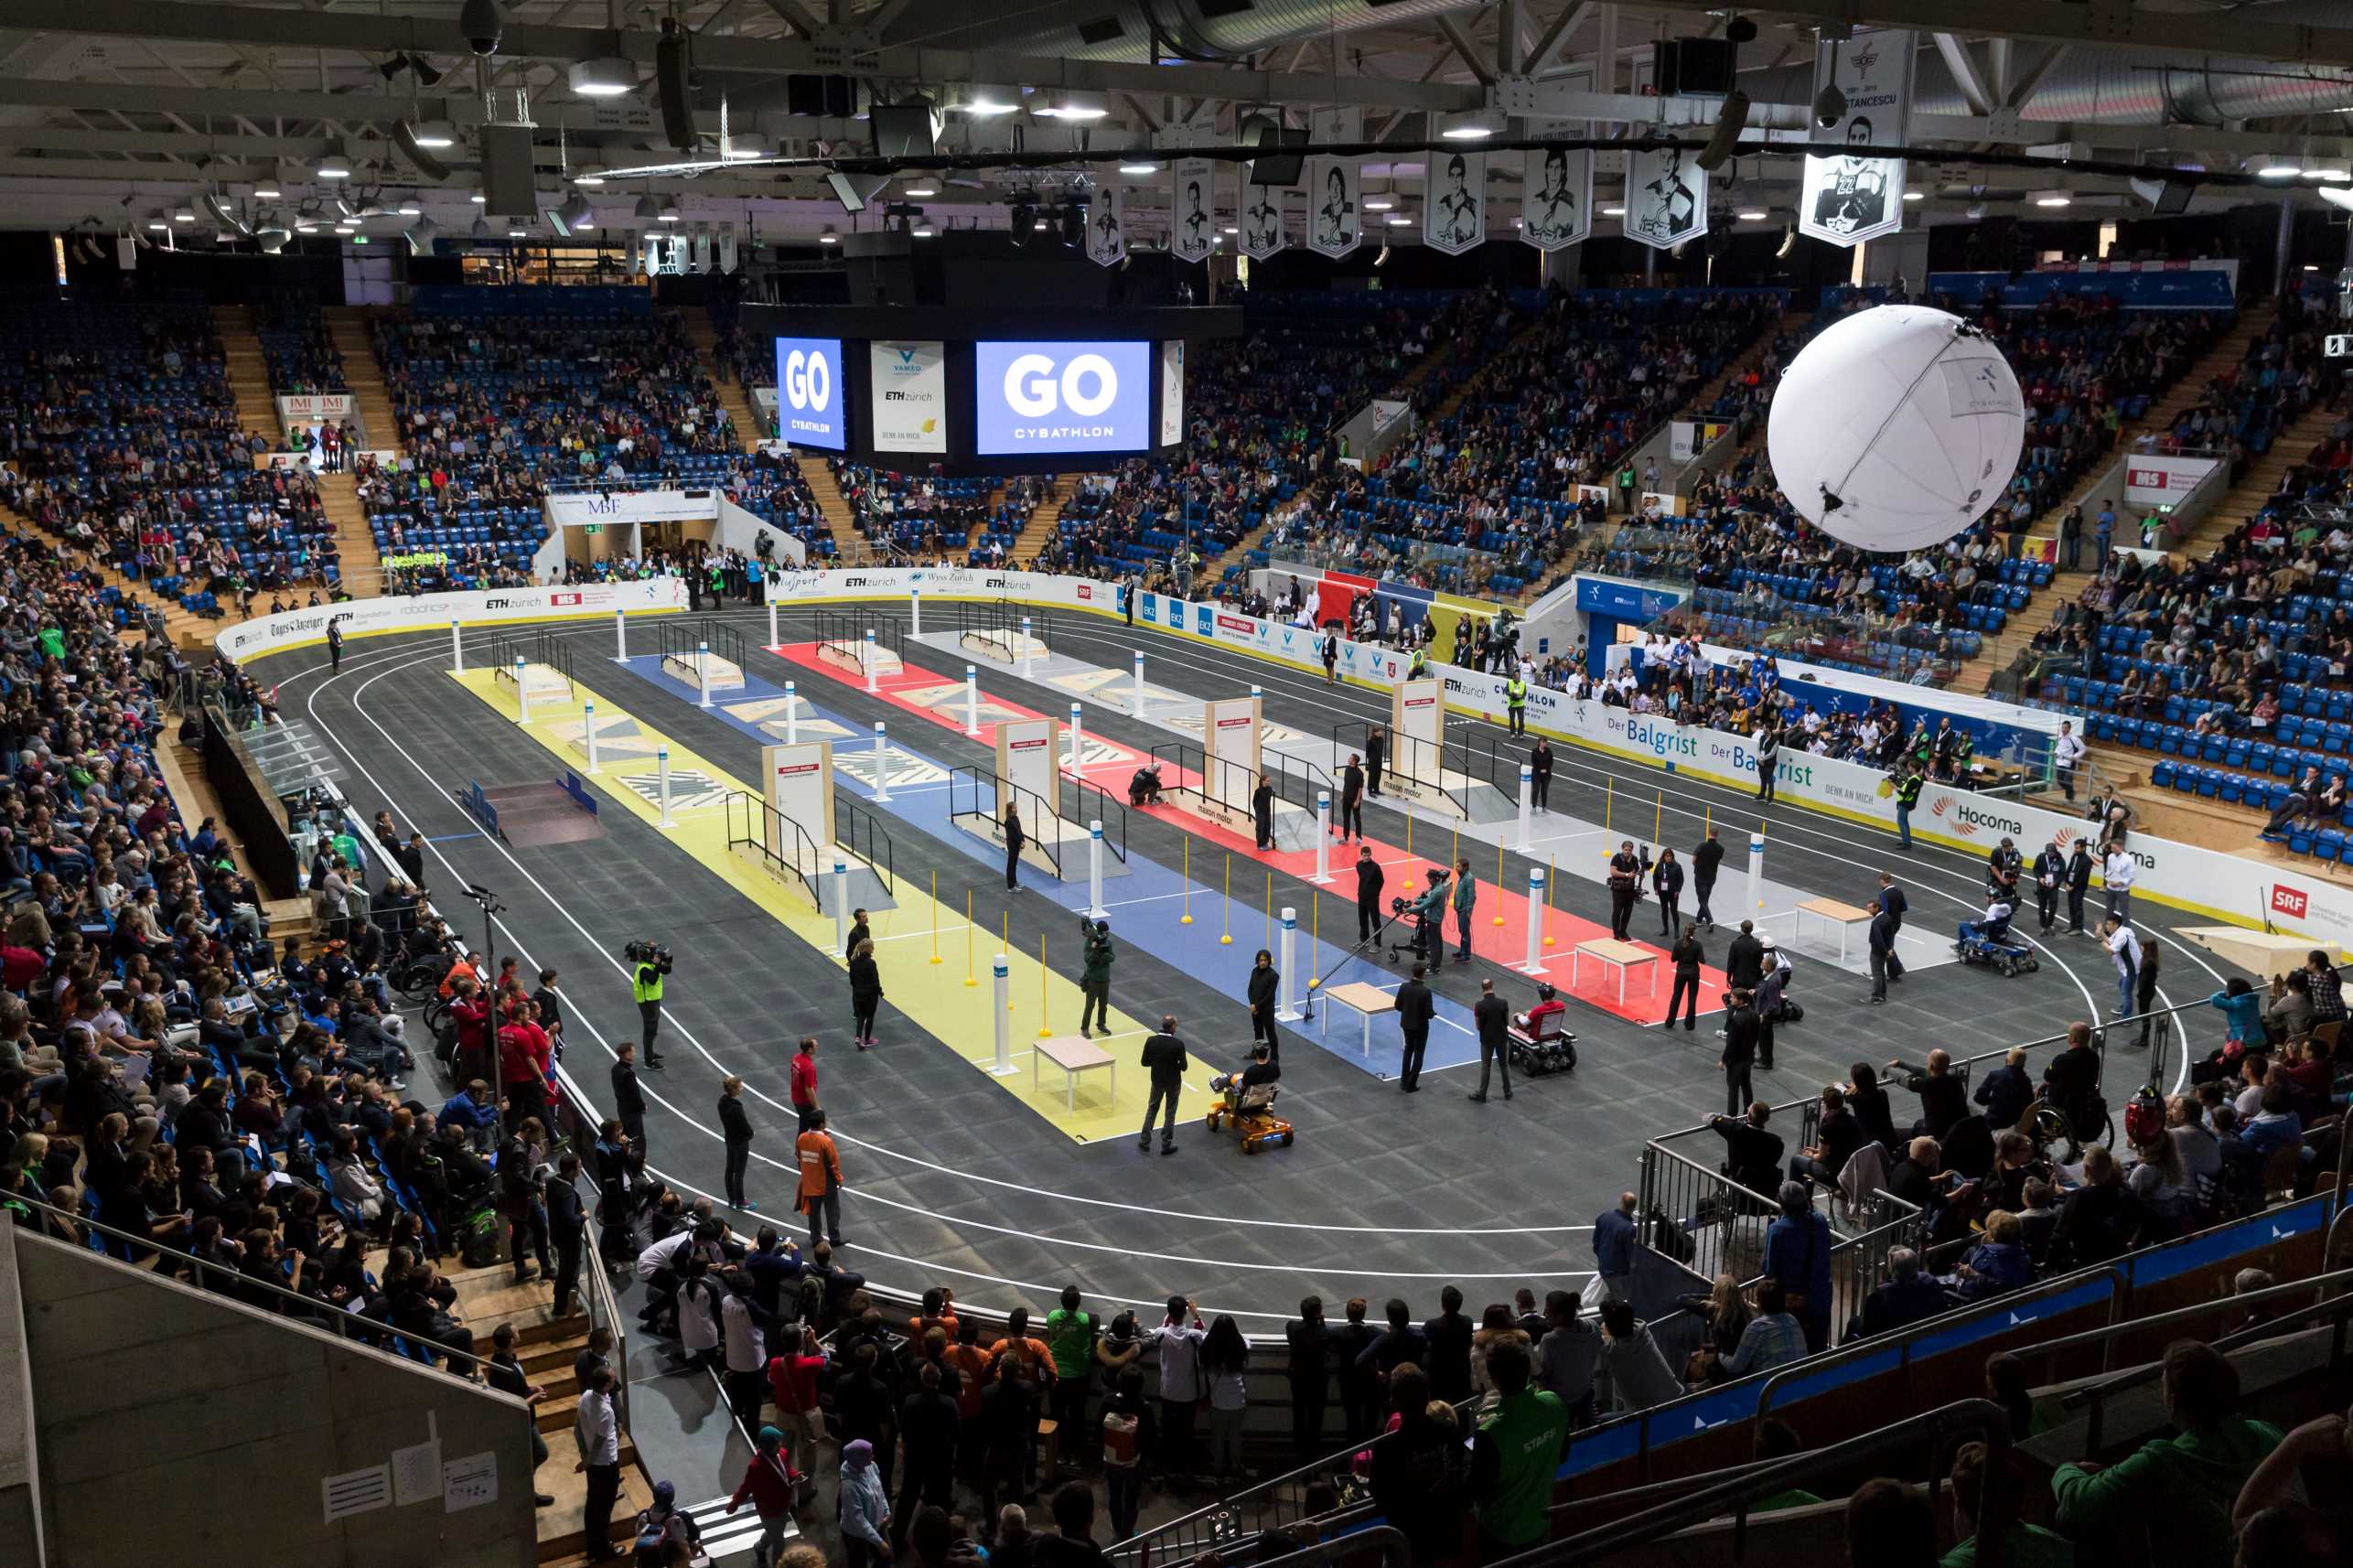 A stadium filled with people. In the middle of the stadium, CYBATHLON races are in place. The crowd is cheering the athletes on.